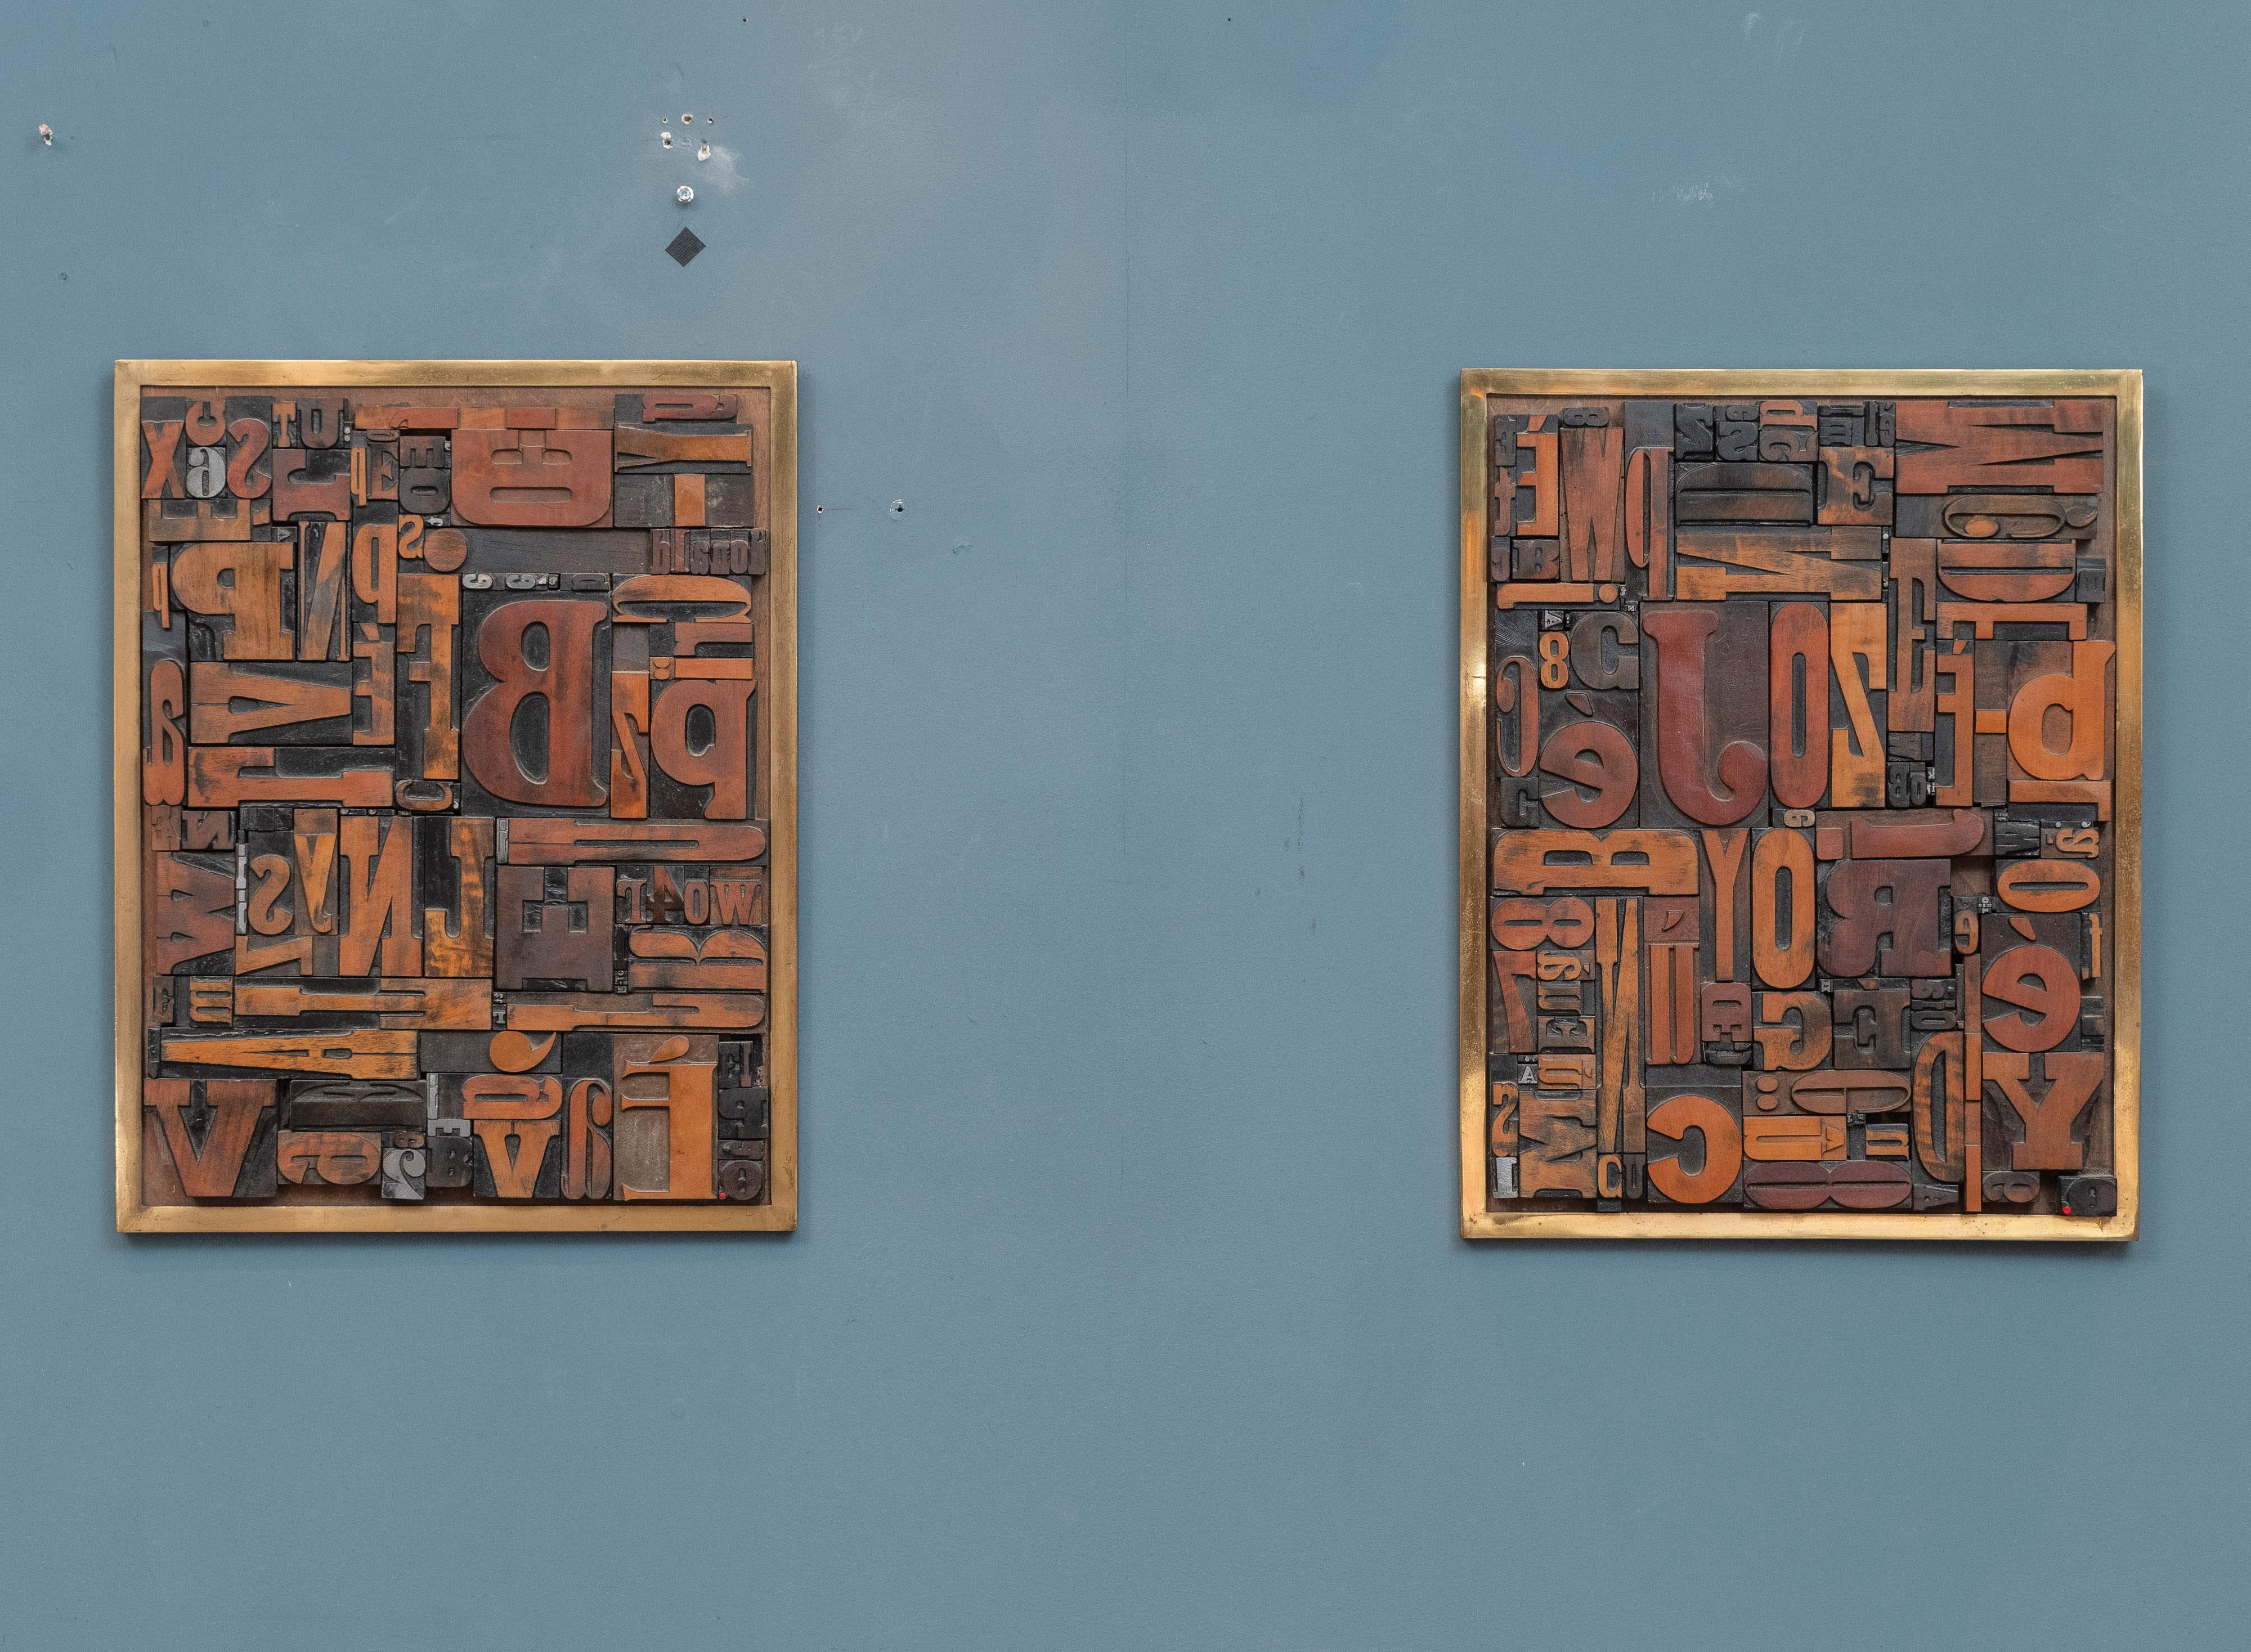 Folk Art printing press or letter block collage art. Interesting assortment of vintage printing blocks arranged in a whimsical visual pleasing manor in heavy brass frames. Matched pair of art works purchased from an estate in Connecticut. Signed and